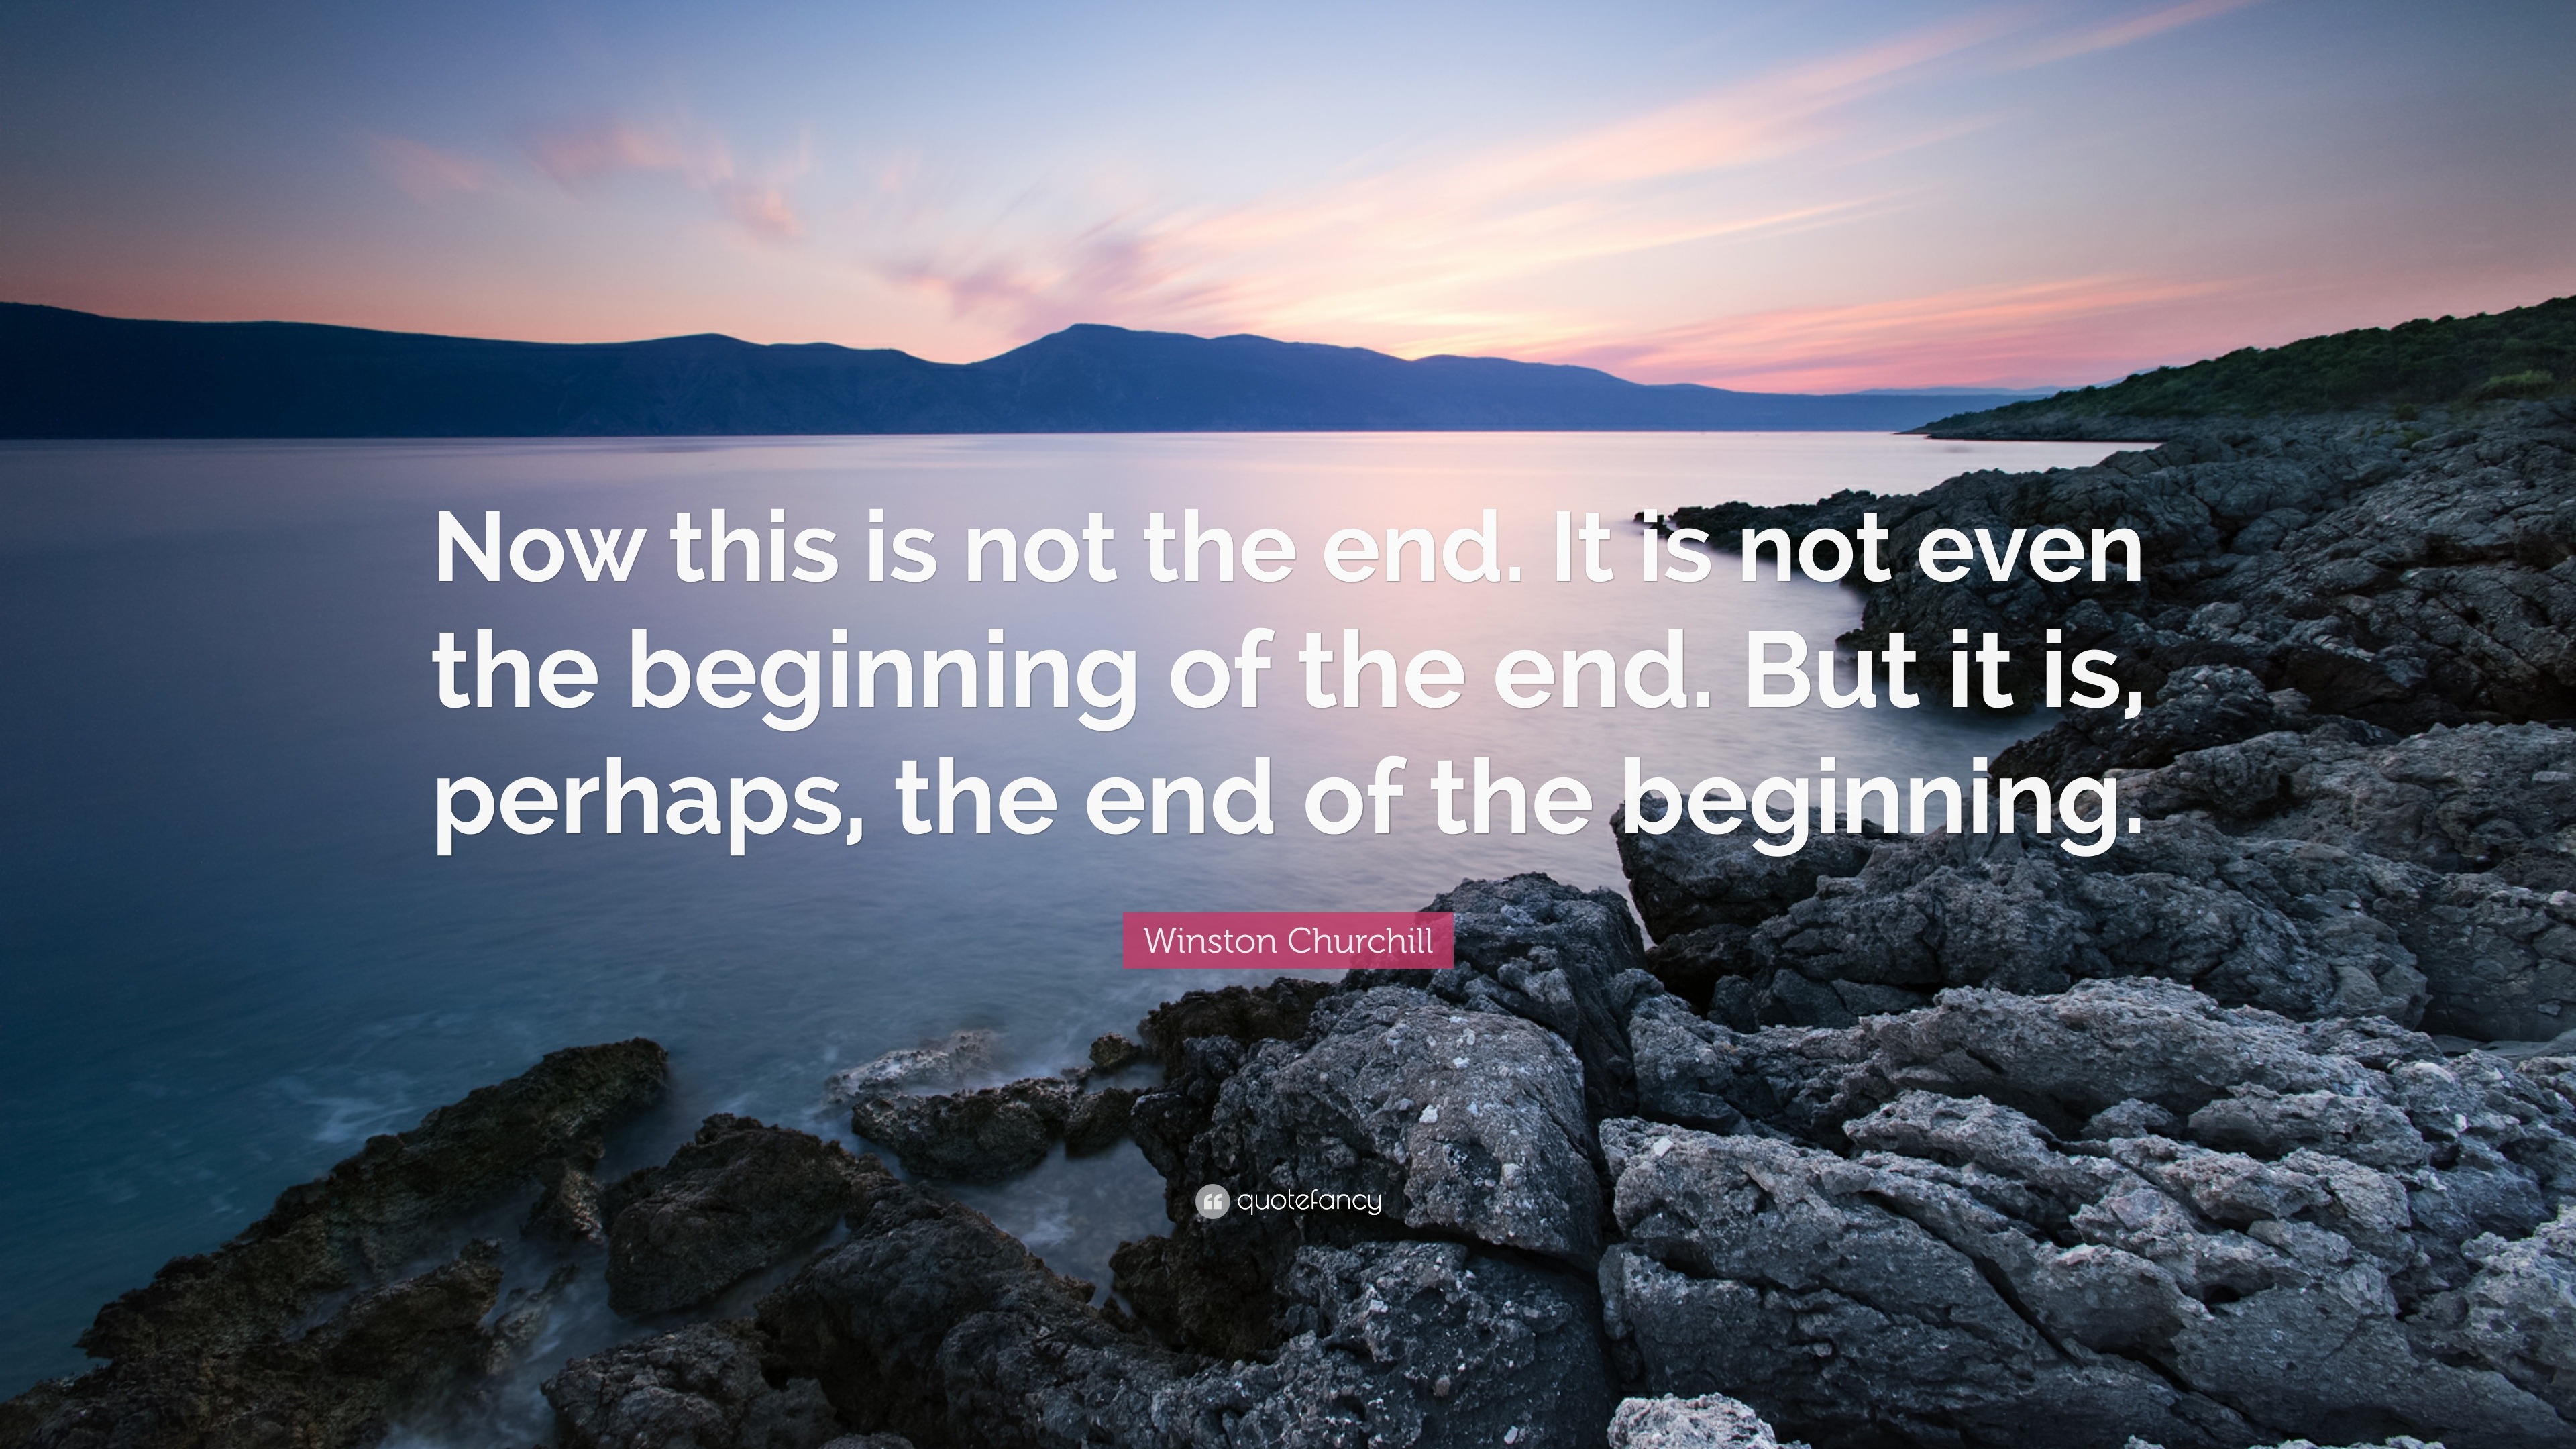 Winston Churchill Quote Now This Is Not The End It Is Not Even The Beginning Of The End But It Is Perhaps The End Of The Beginning 12 Wallpapers Quotefancy